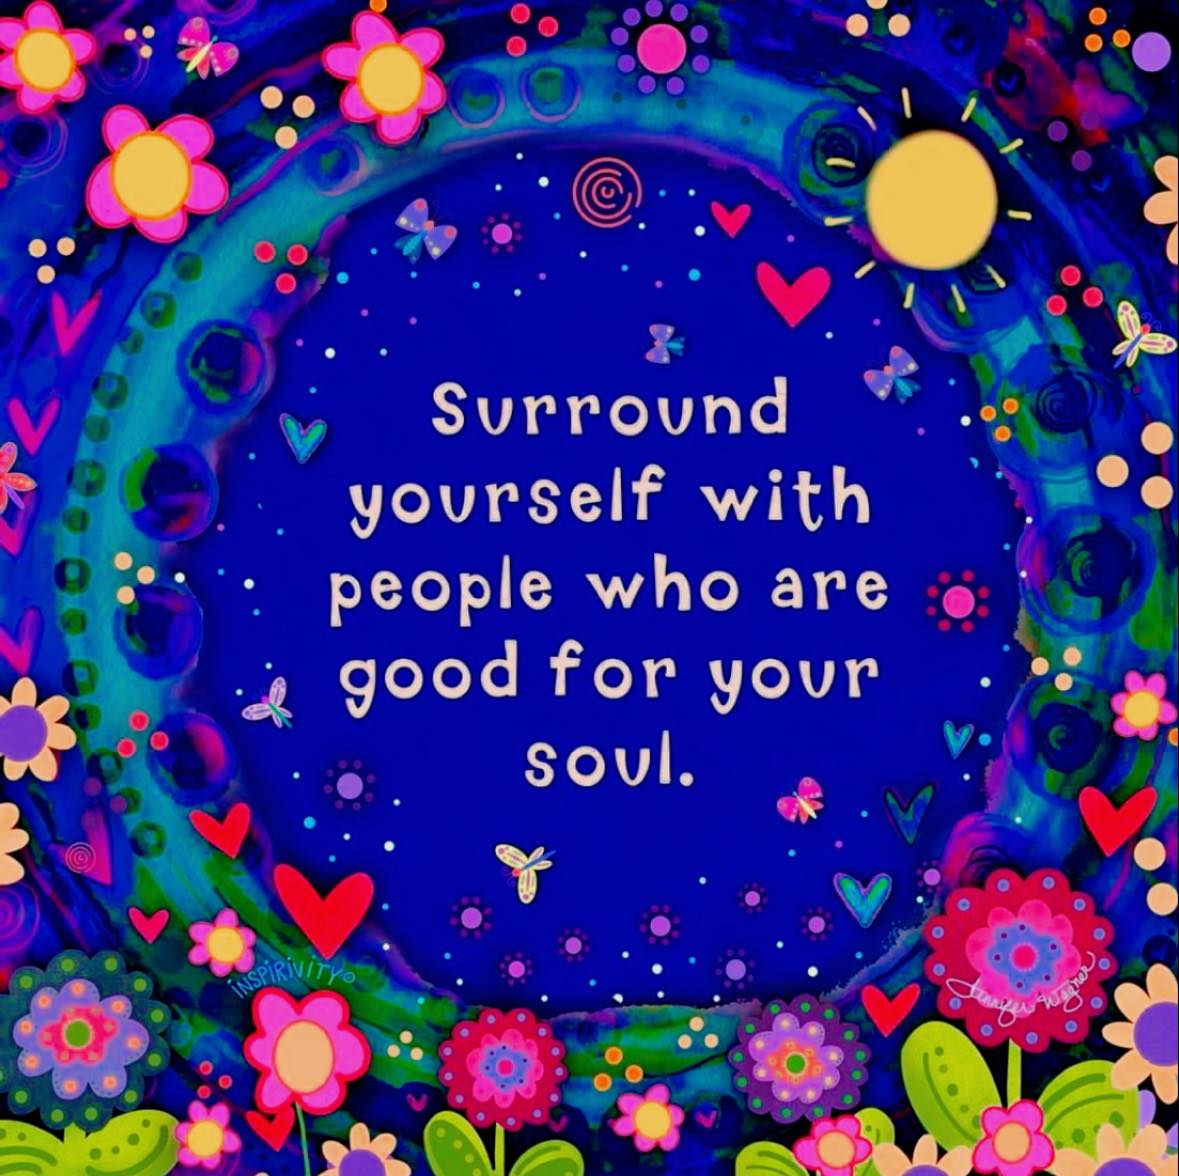 Surround yourself with people who are good for your soul